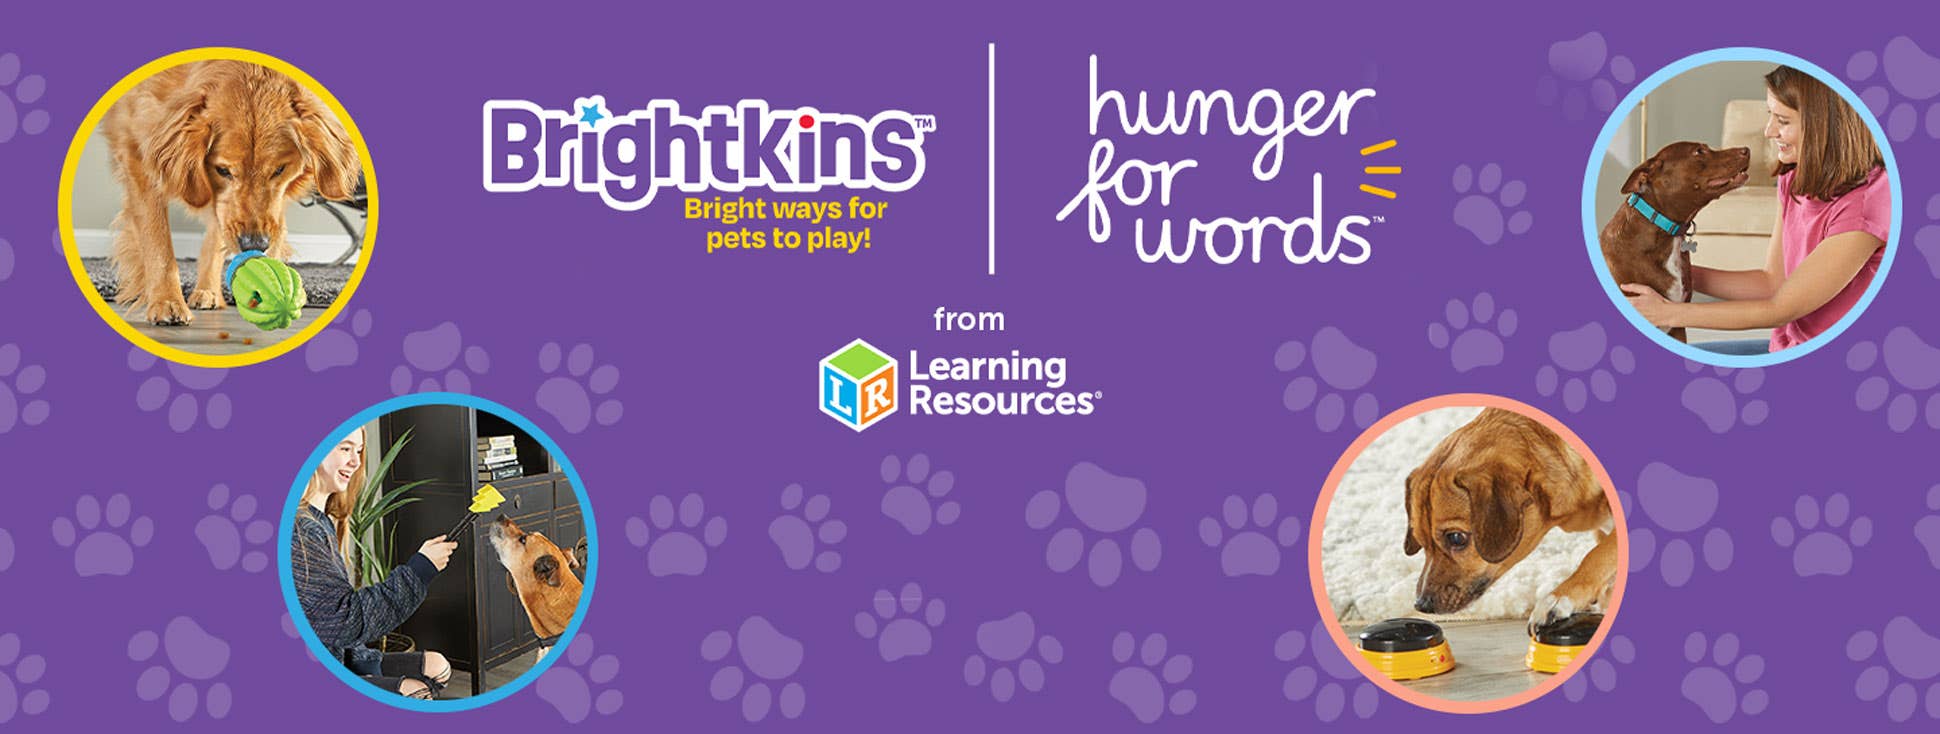 brightkins and hunger for words story